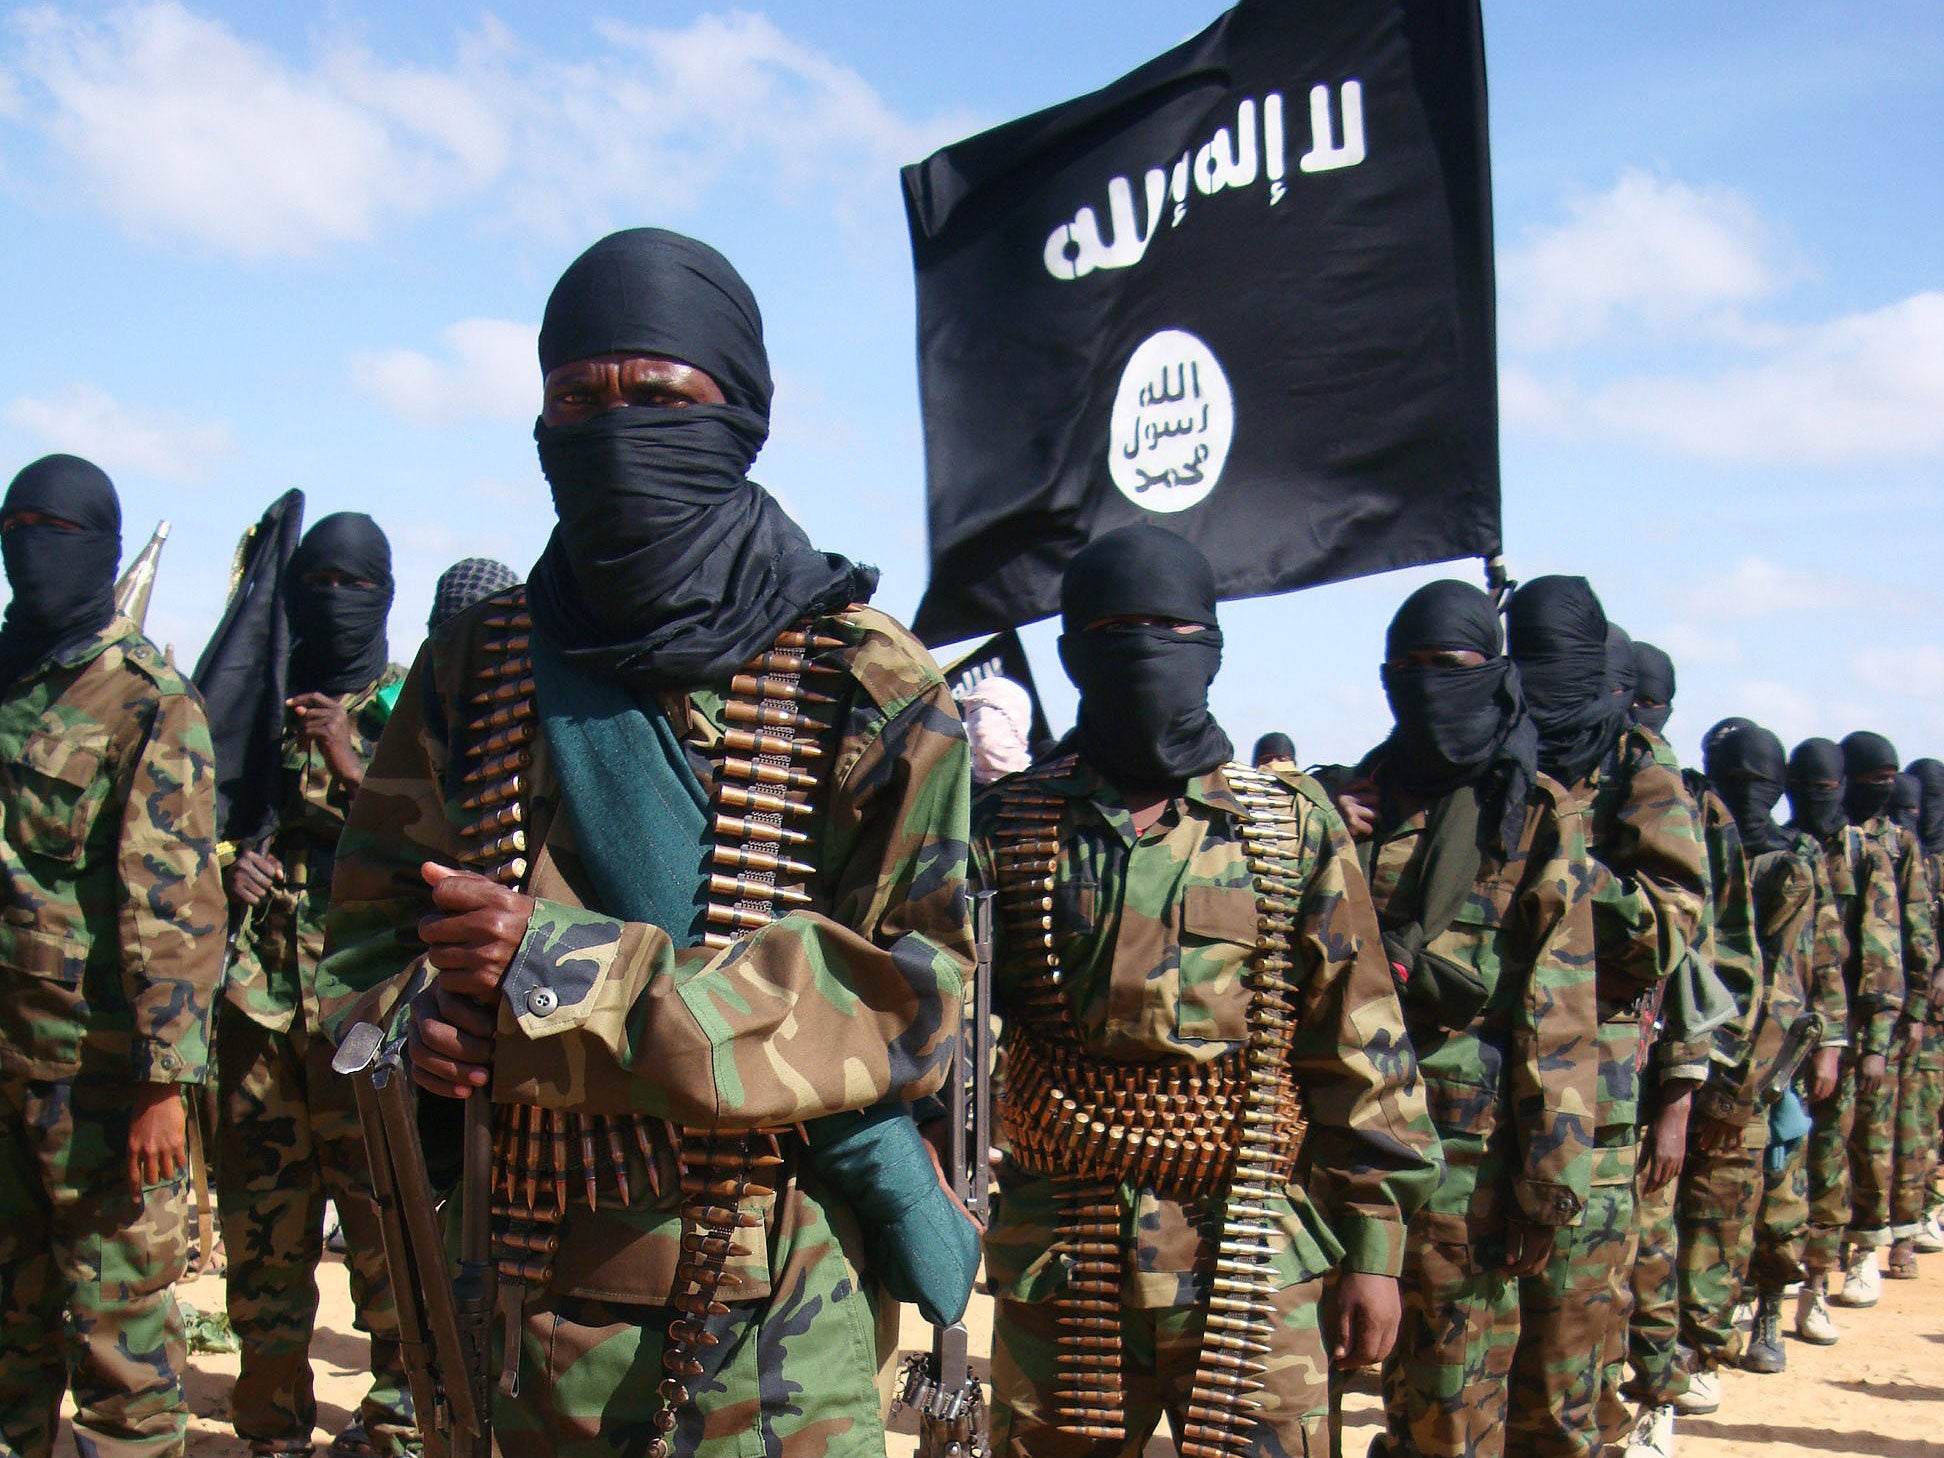 The new group may be comprised of former al-Shabaab fighters (pictured)